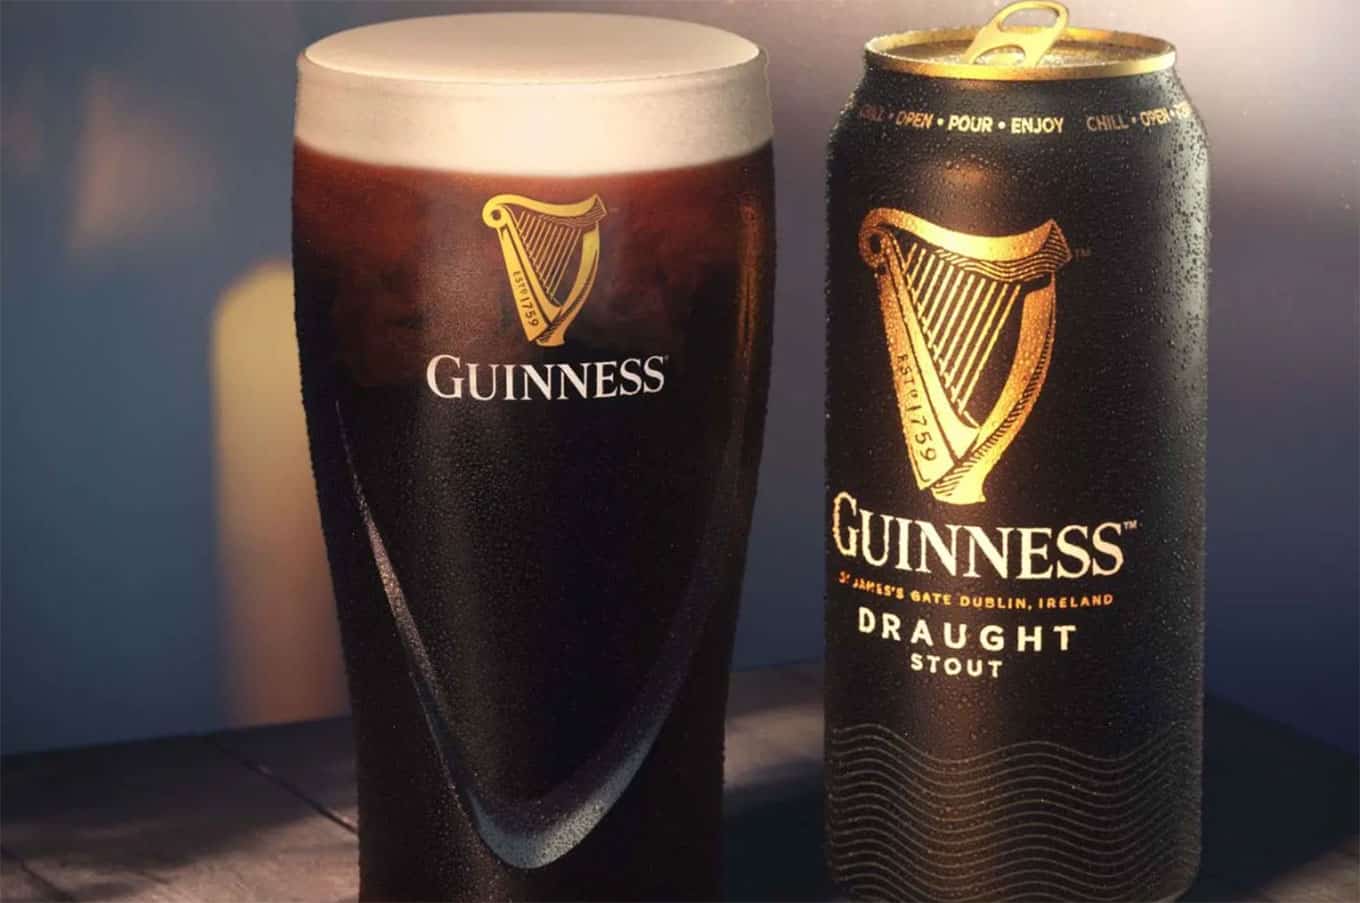 A glass of Guinness beside the can